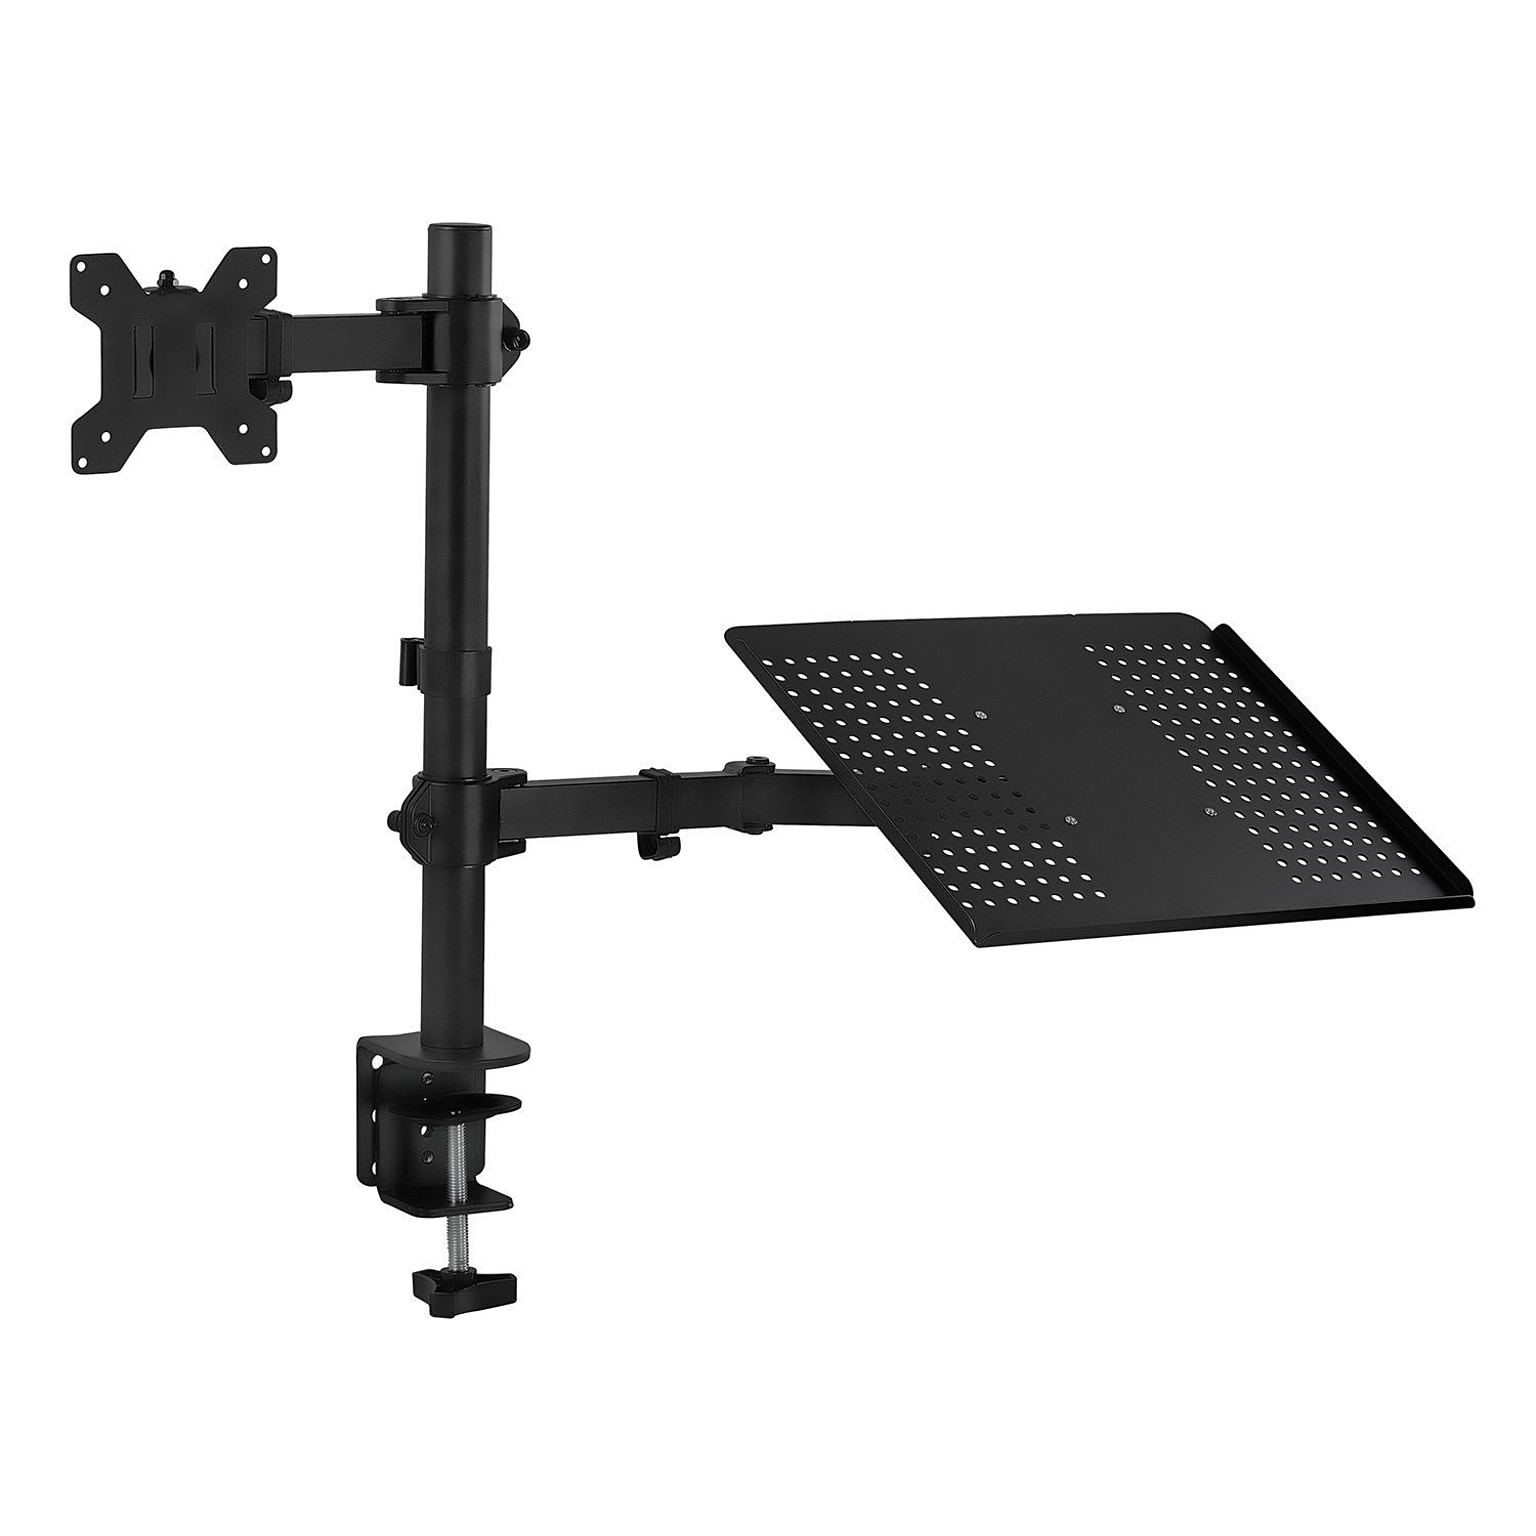 Mount-It! Laptop Desk Stand and Monitor Mount for 17 Laptops and 13-27 Monitors, Black (MI-4352LTMN)